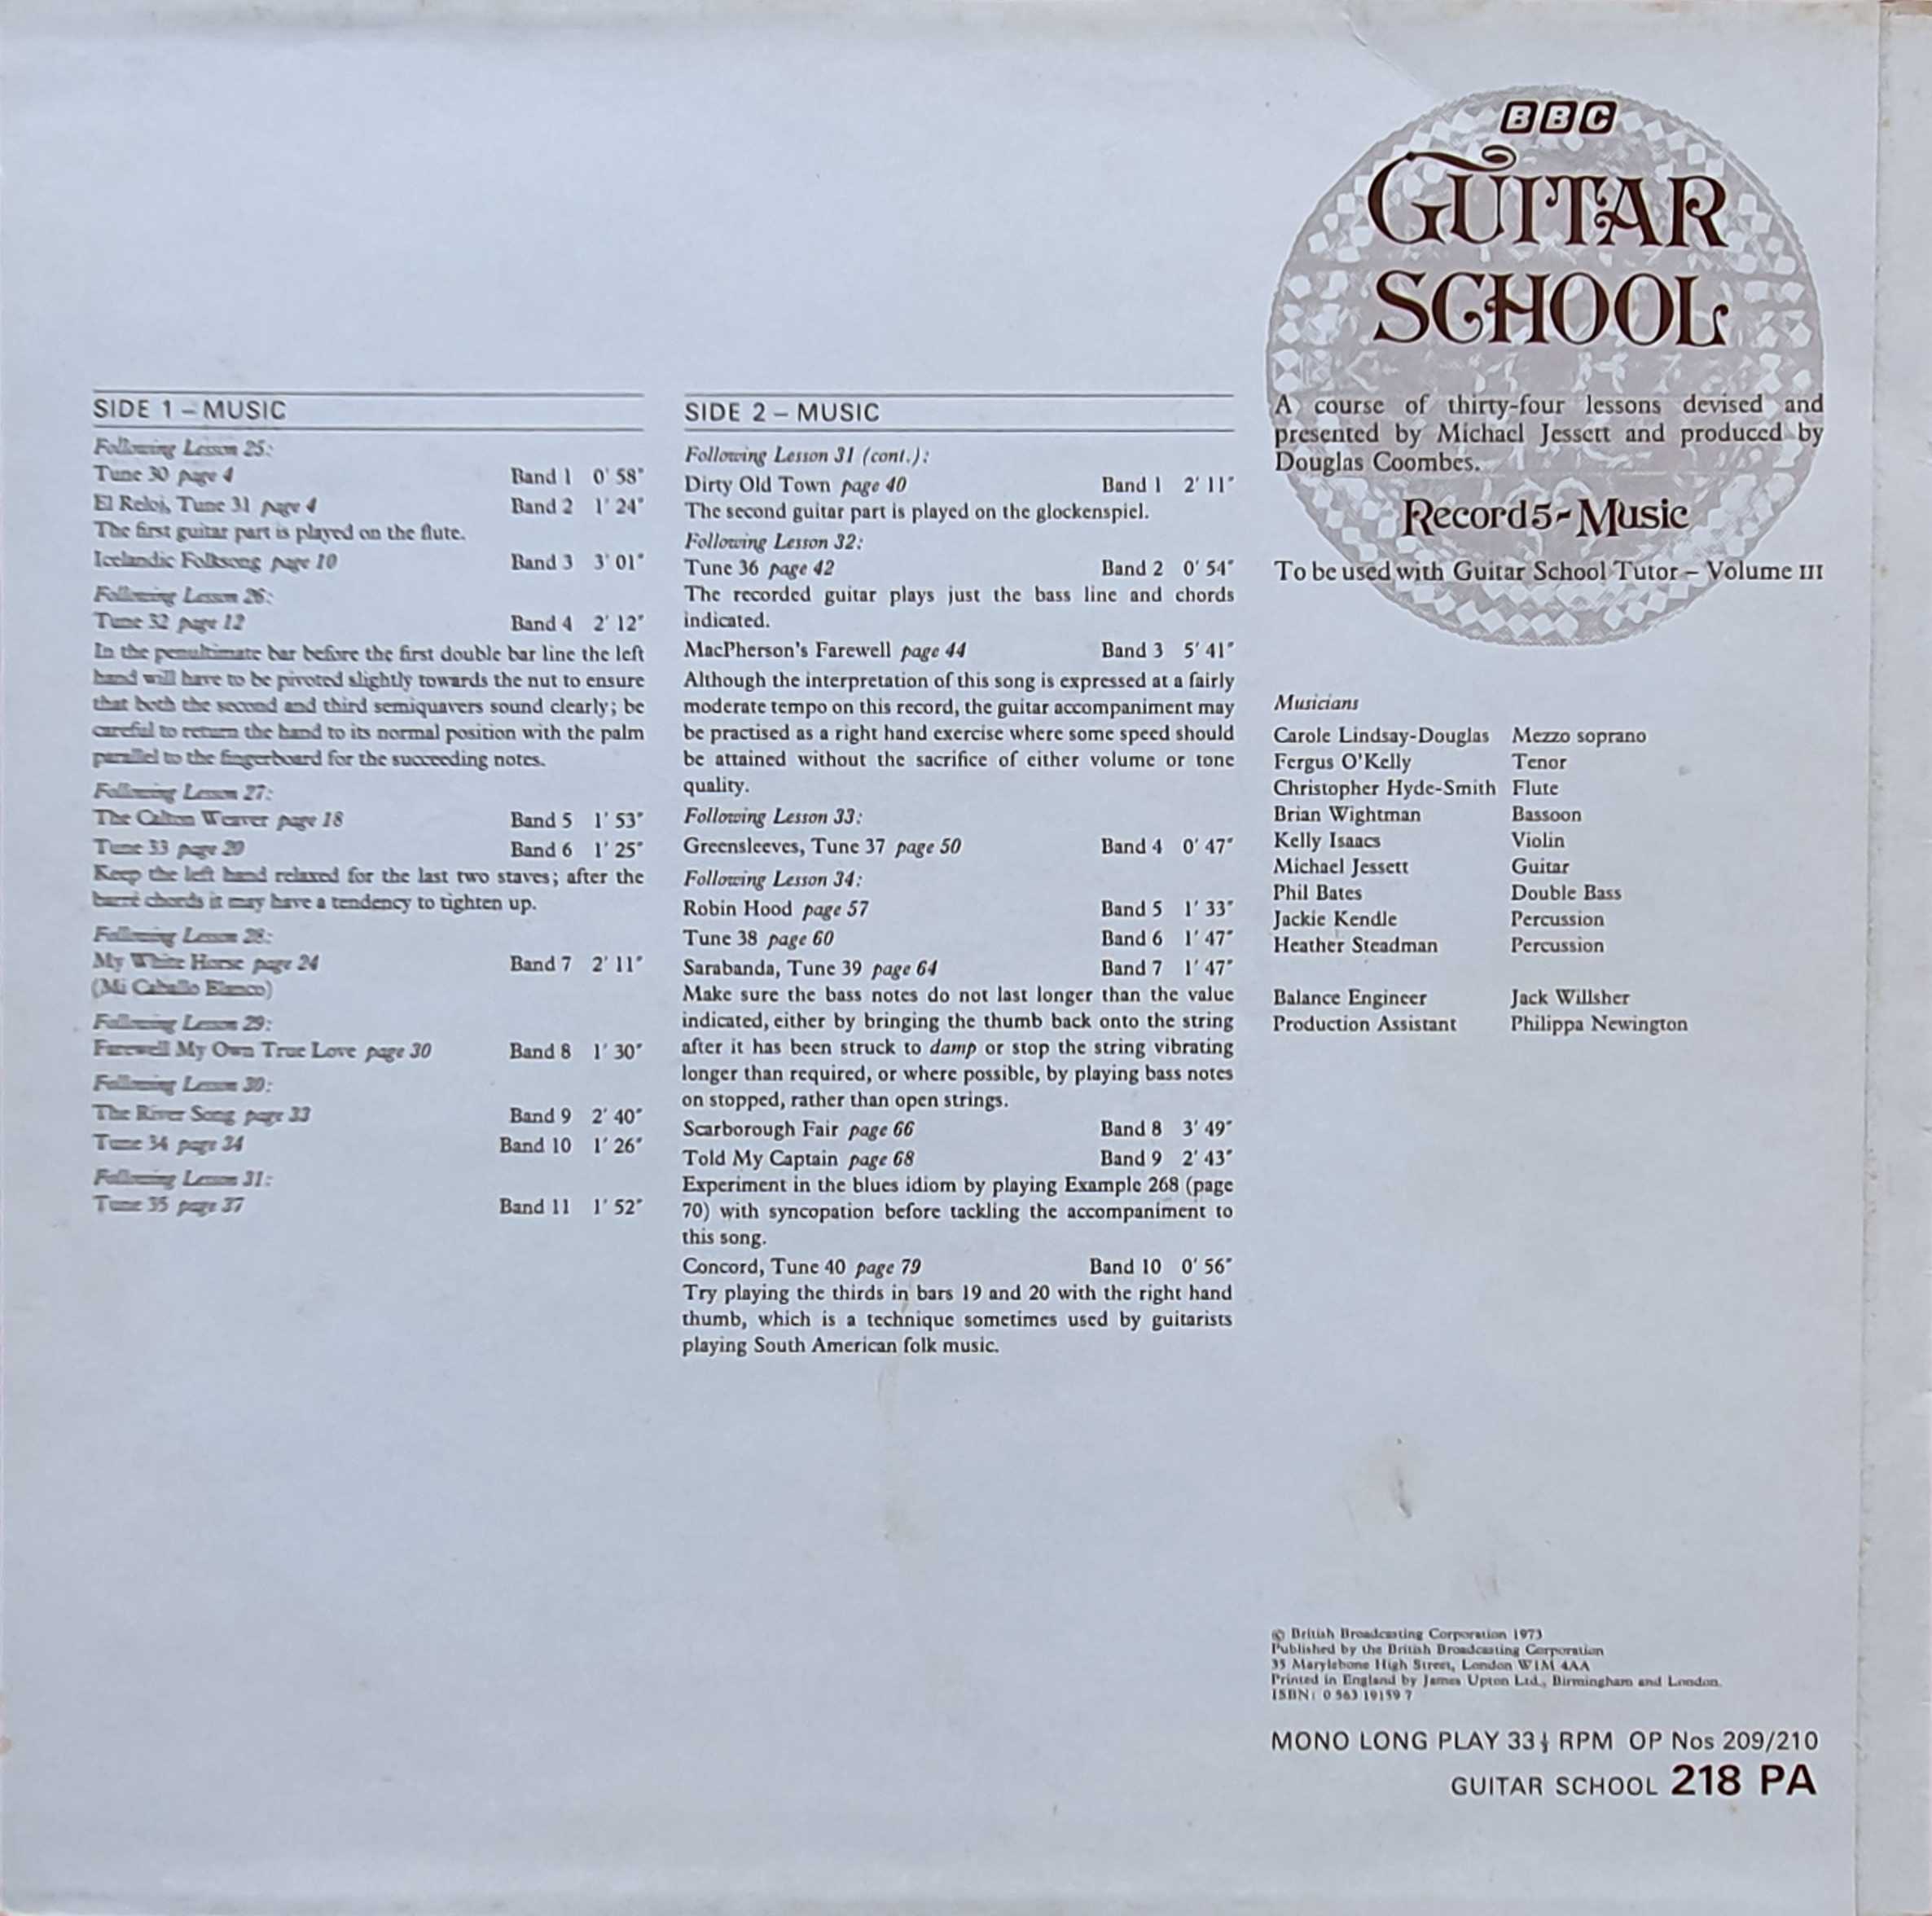 Picture of OP 209/210 Guitar school - Record 5 - Music by artist Michael Jessett from the BBC records and Tapes library